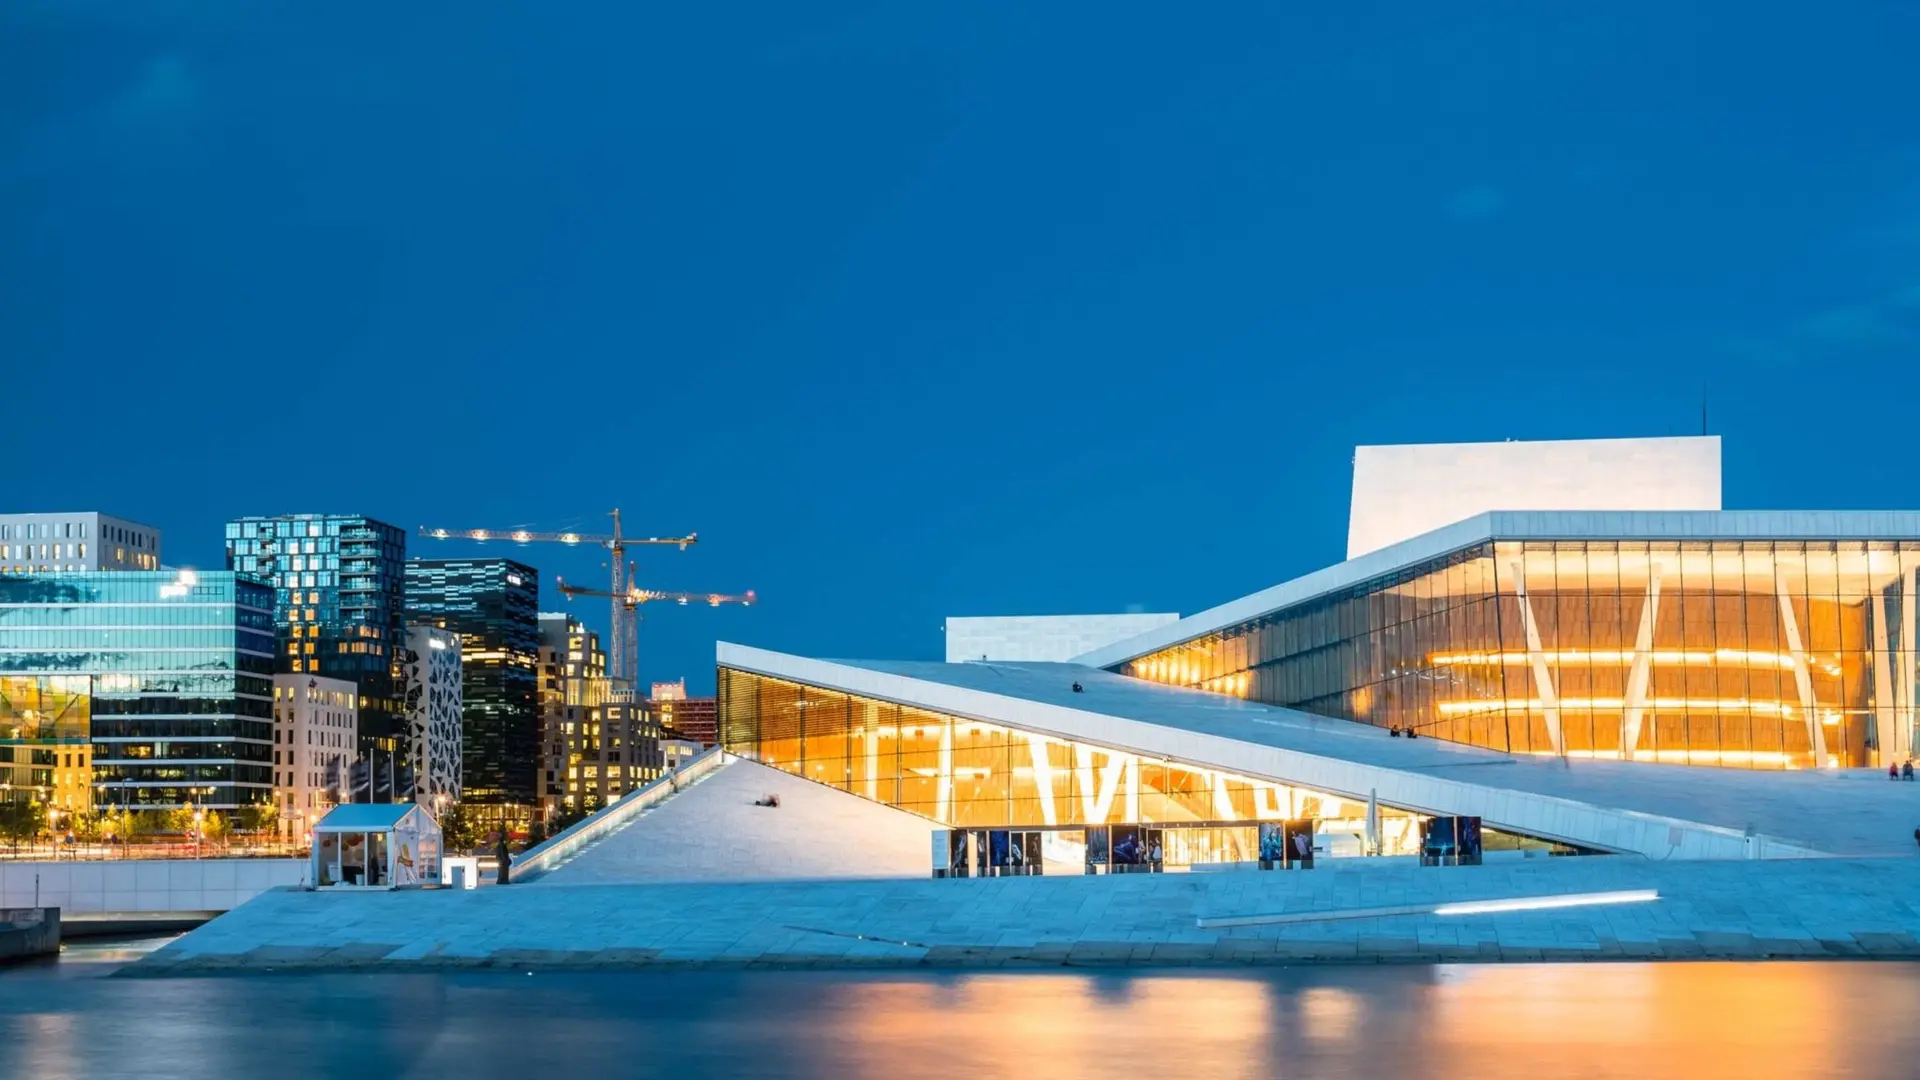 The Opera House in Oslo, Norway. With large glass windows covering floor to ceiling, and futuristic white design.